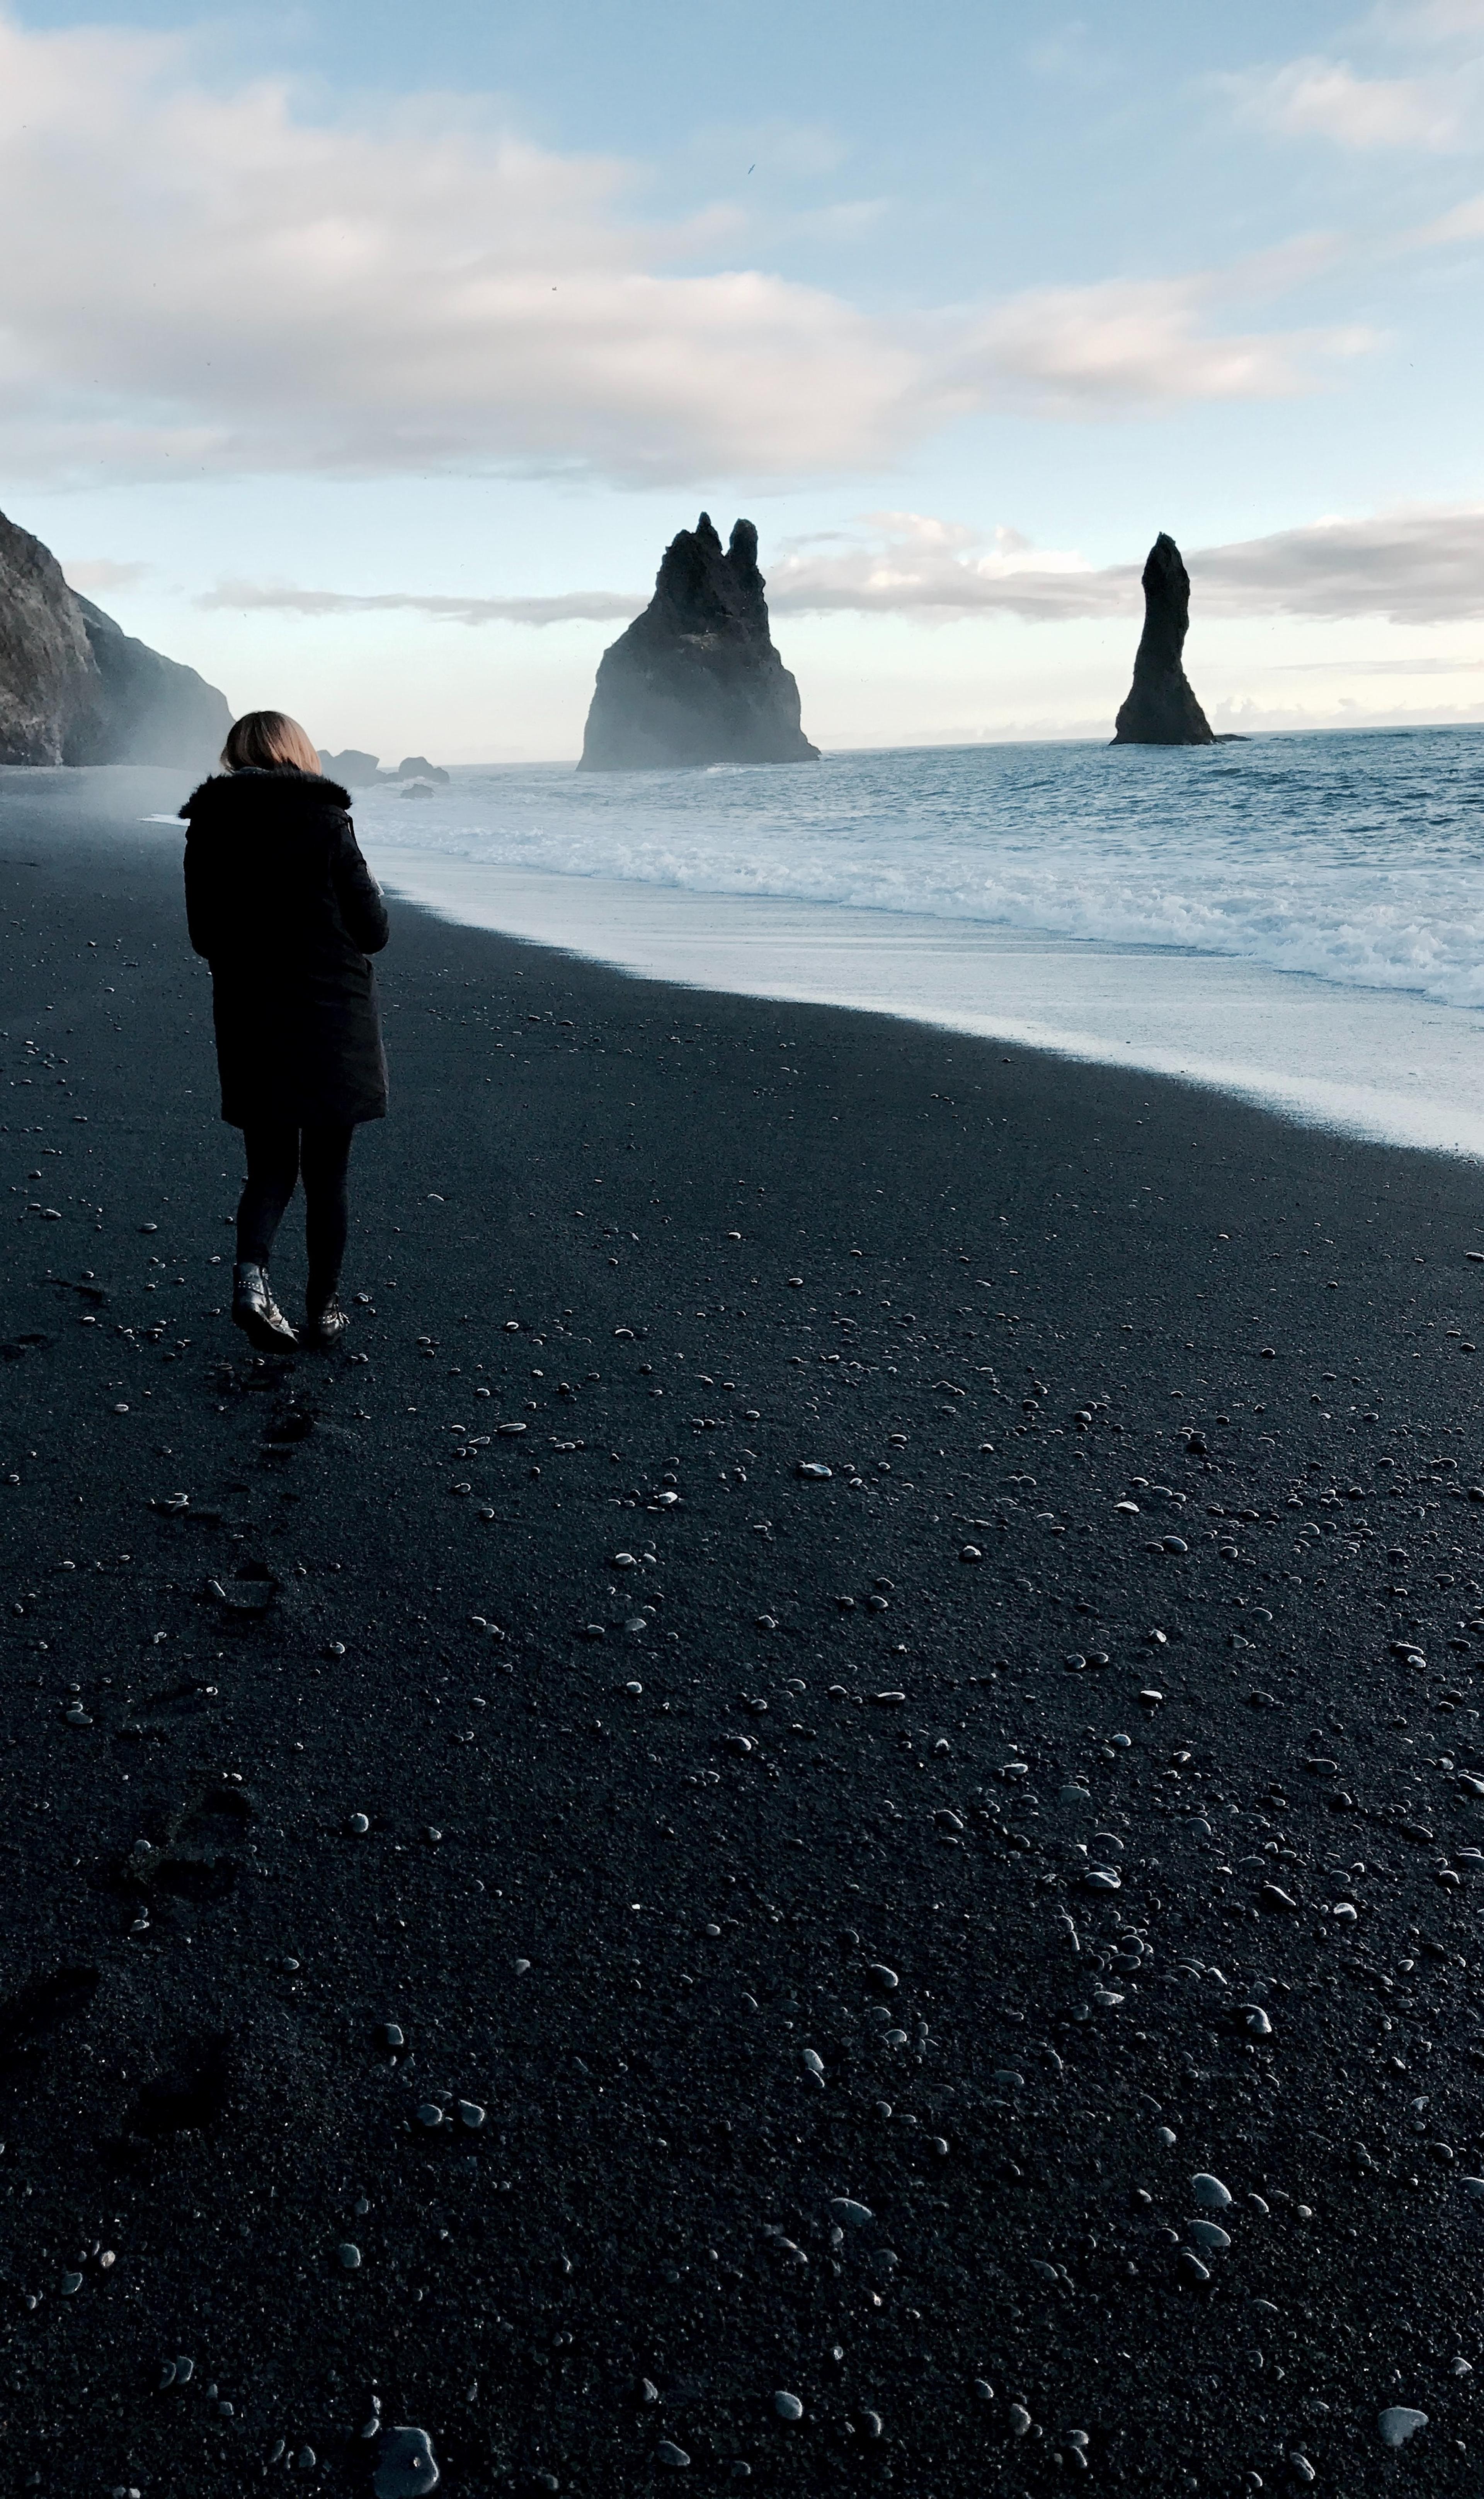 A woman strolling on the black sand beach, wrapped in a voluminous black parka.